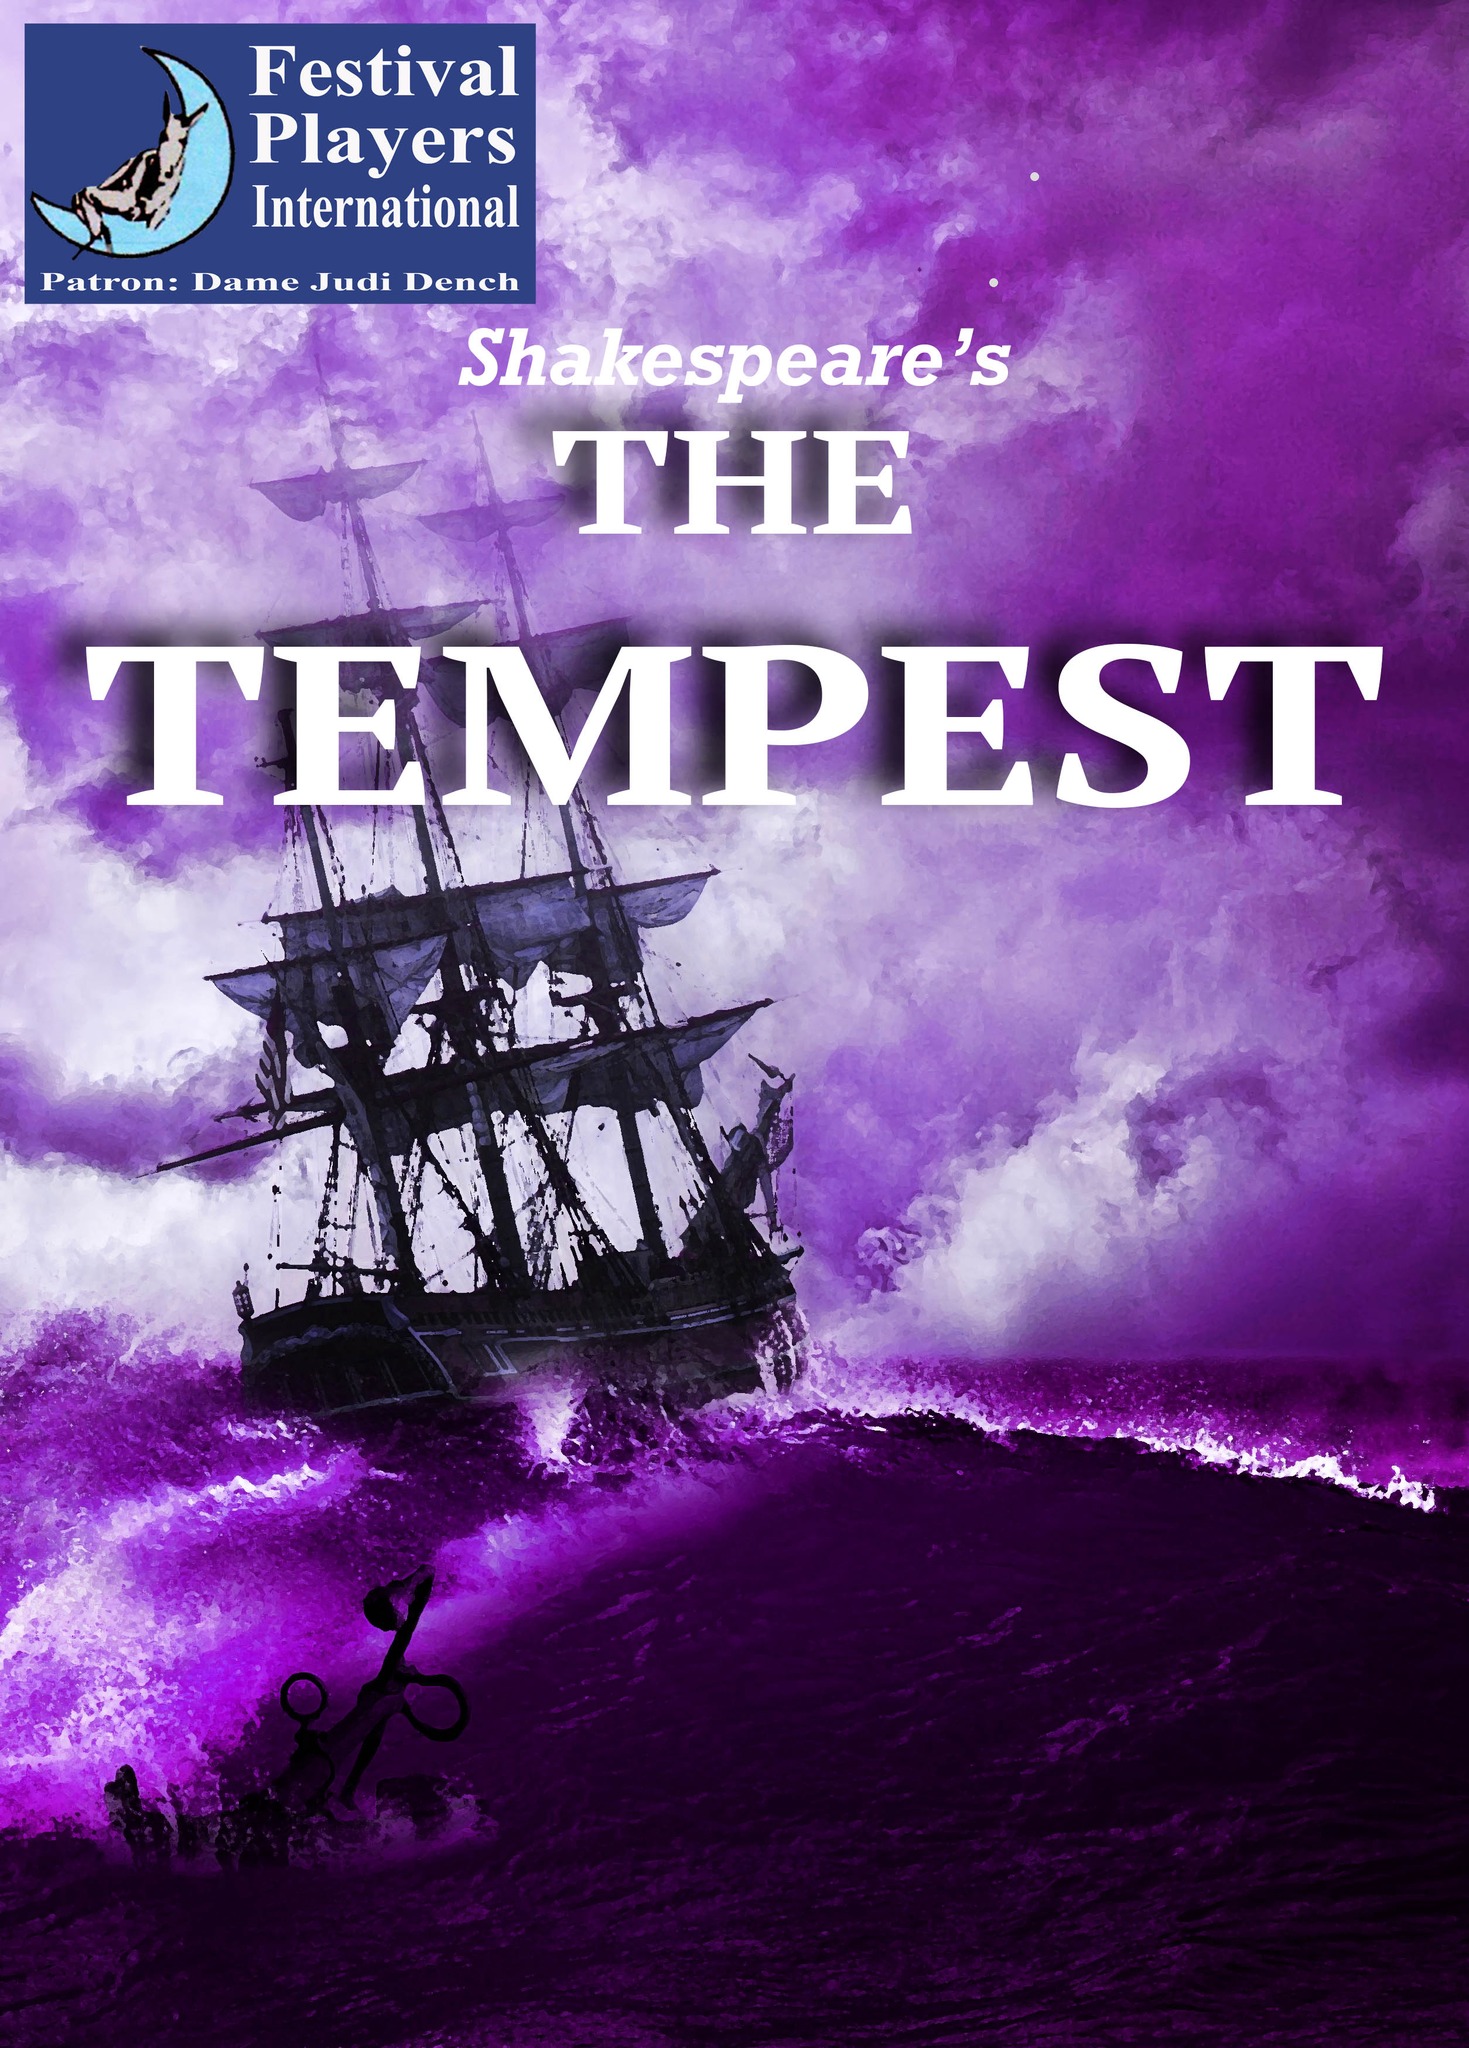 Festival Players: Shakespeare's The Tempest